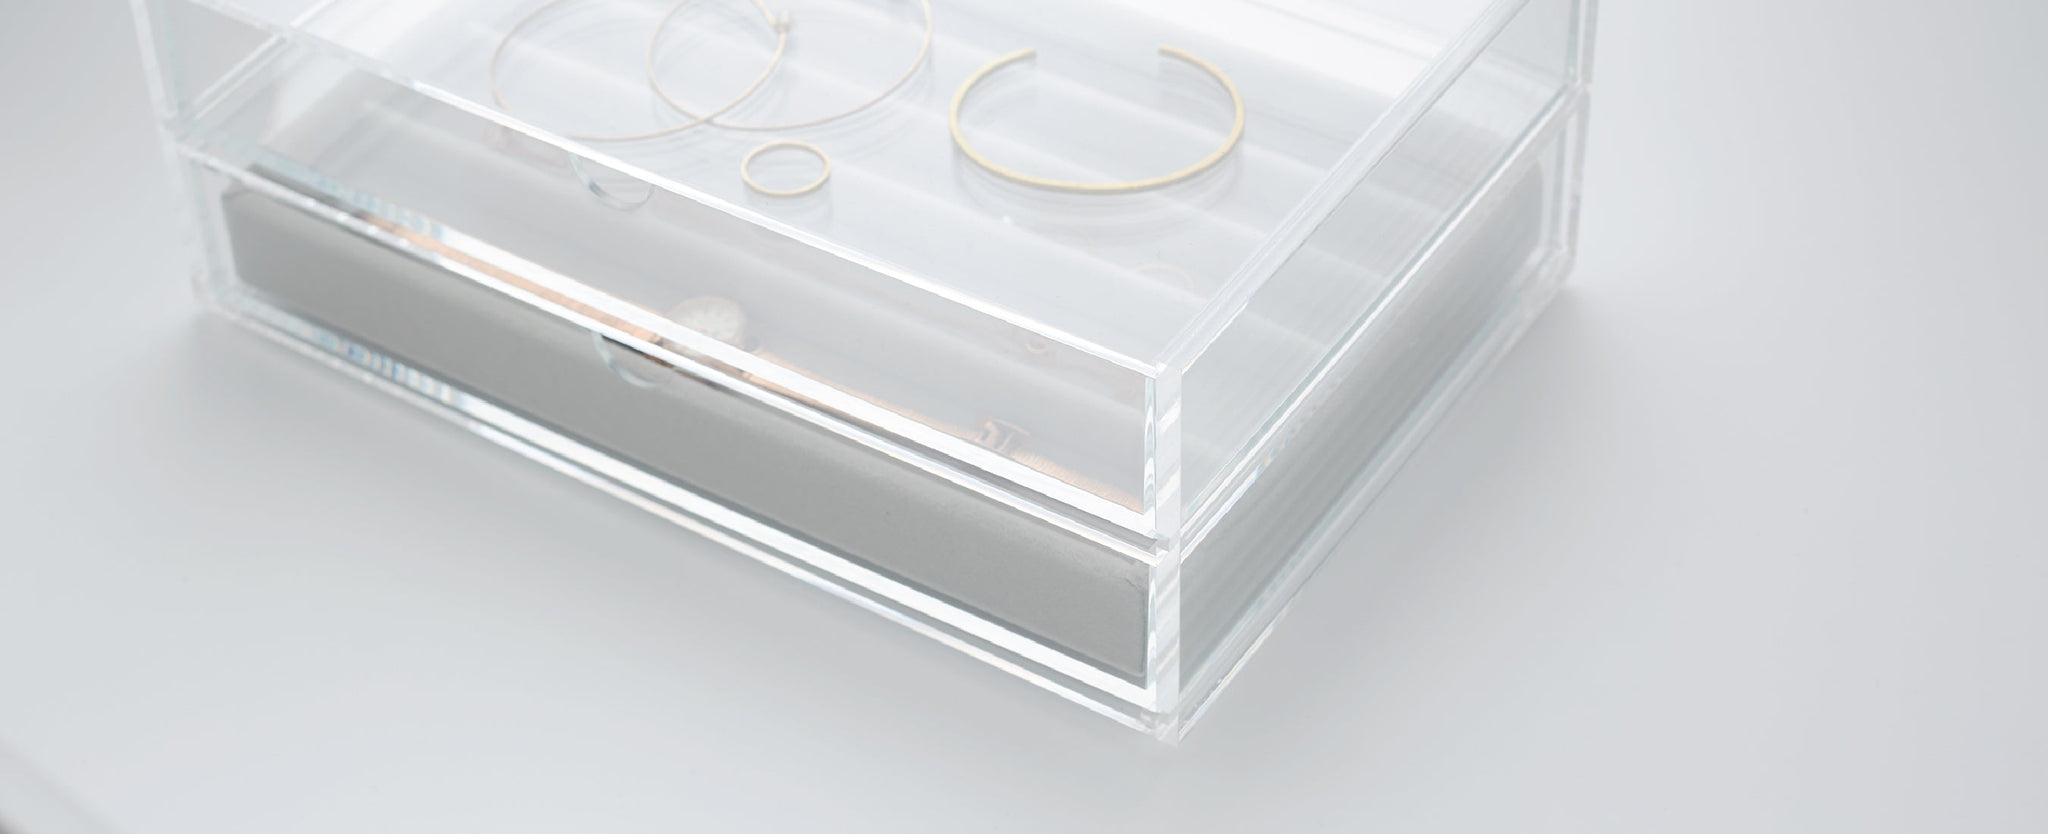 Clear Acrylic Storage Container on a White Background